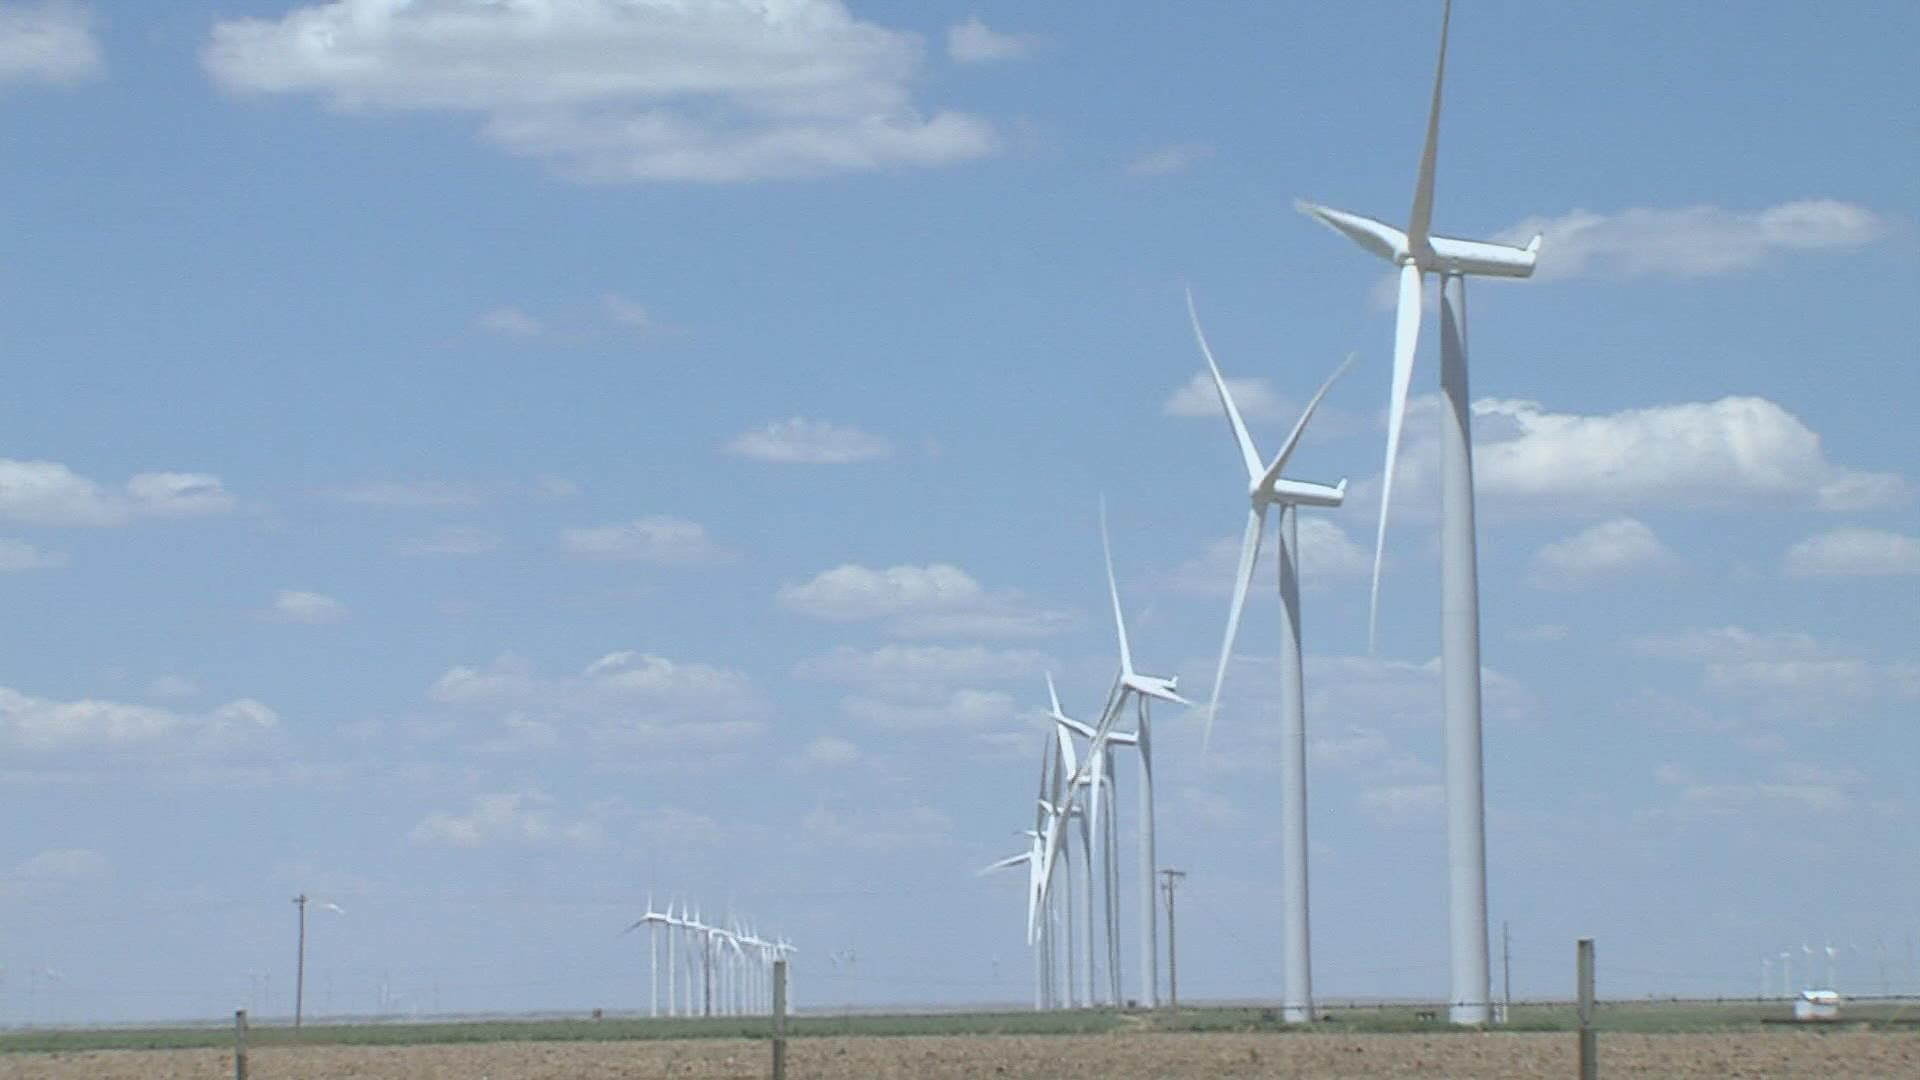 The company wants to use the renewable energy to help run its oil and gas operations on over 25,000 acres of its property.